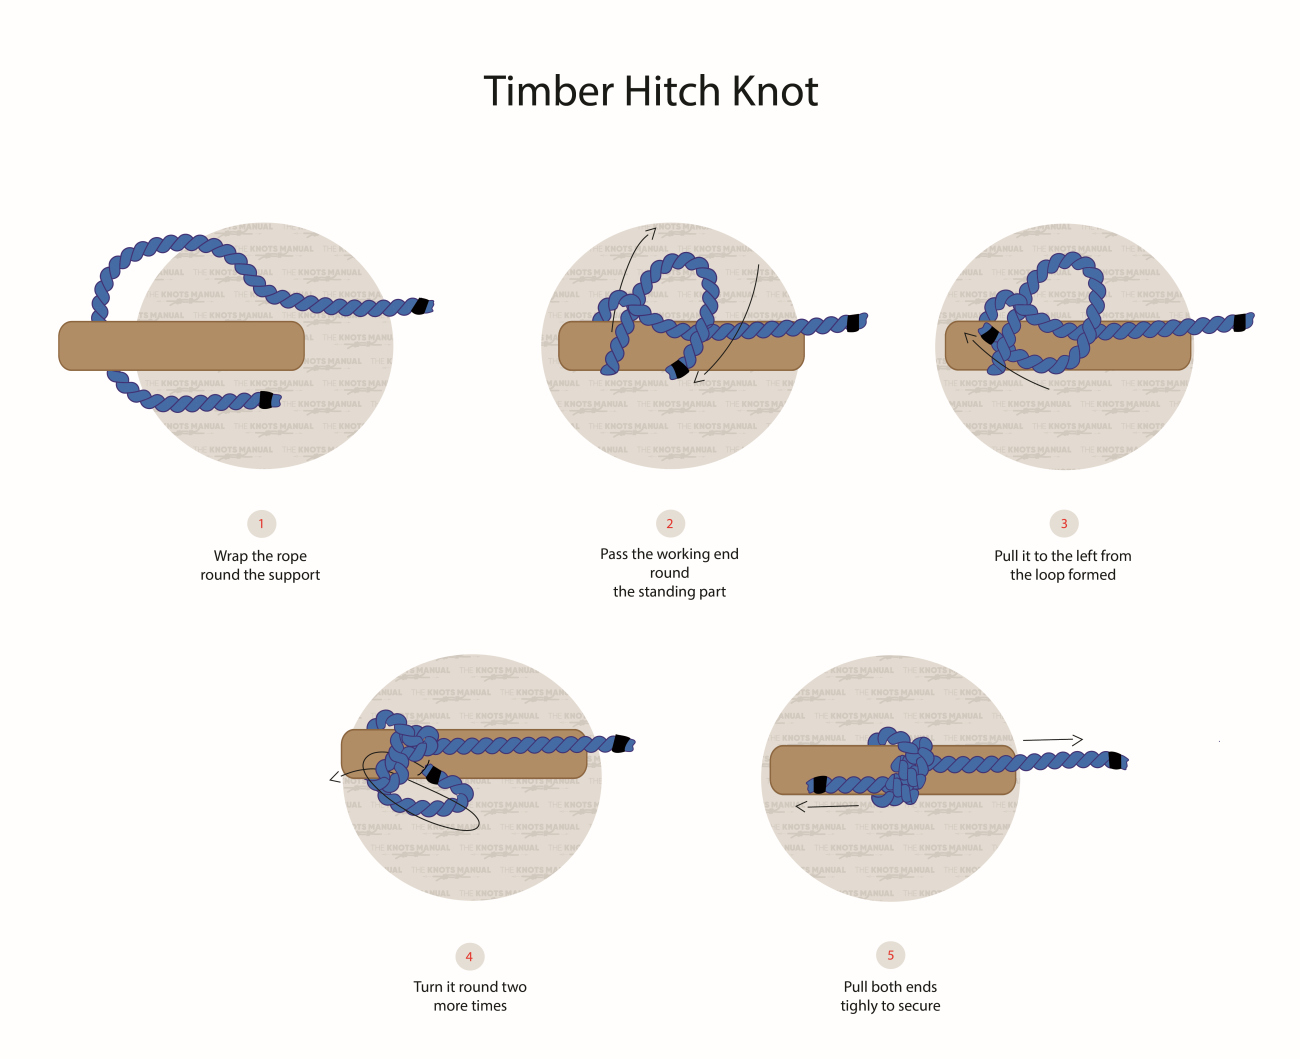 Timber Hitch Knot Step by step